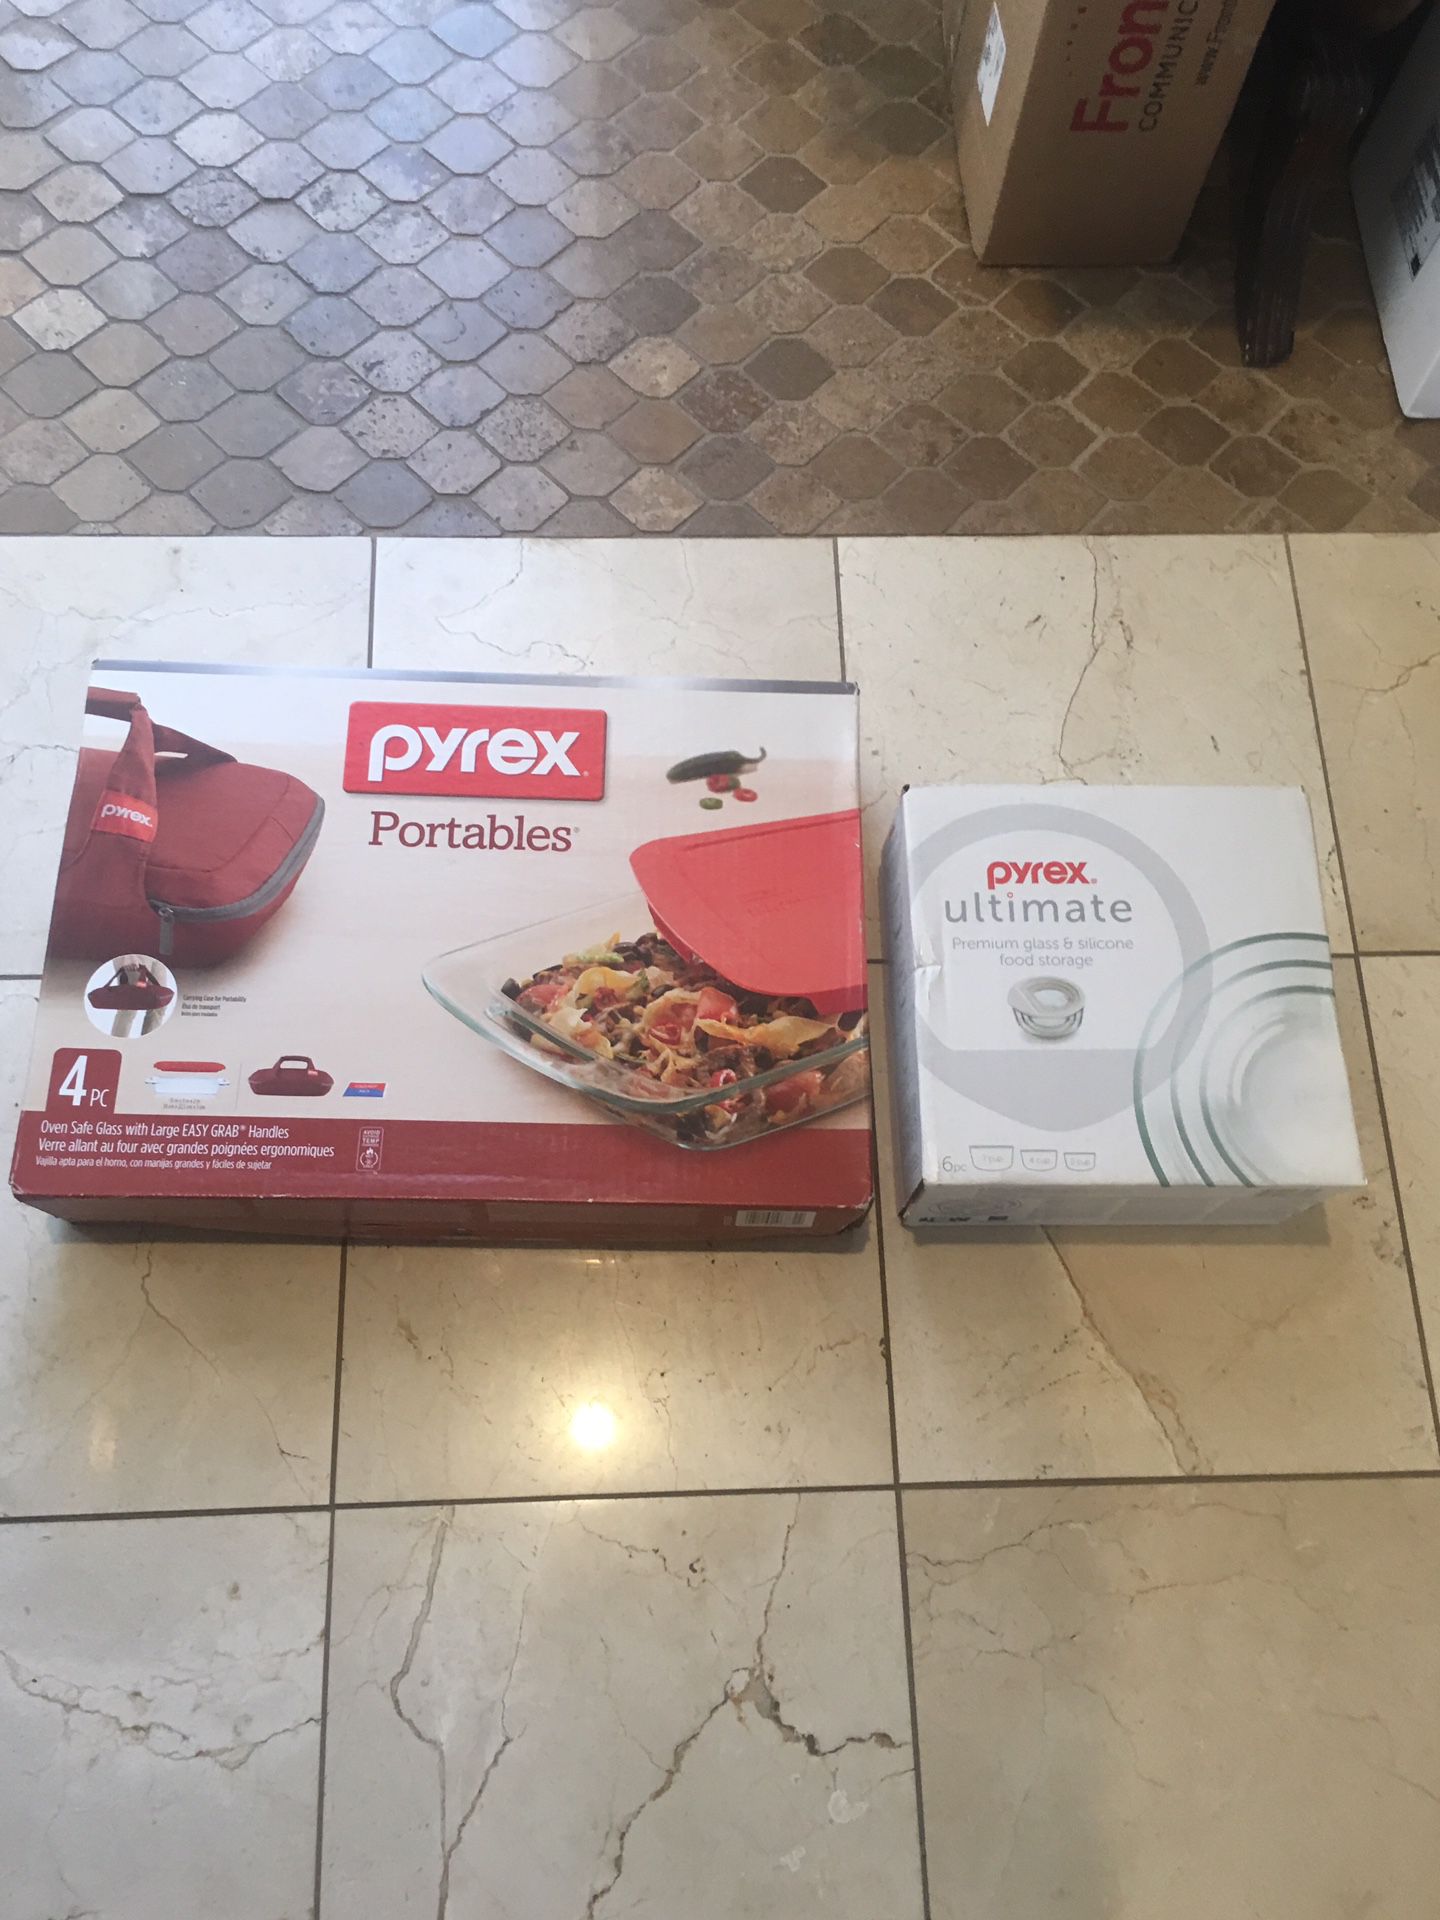 2 Pyrex boxes a portable and a food storage